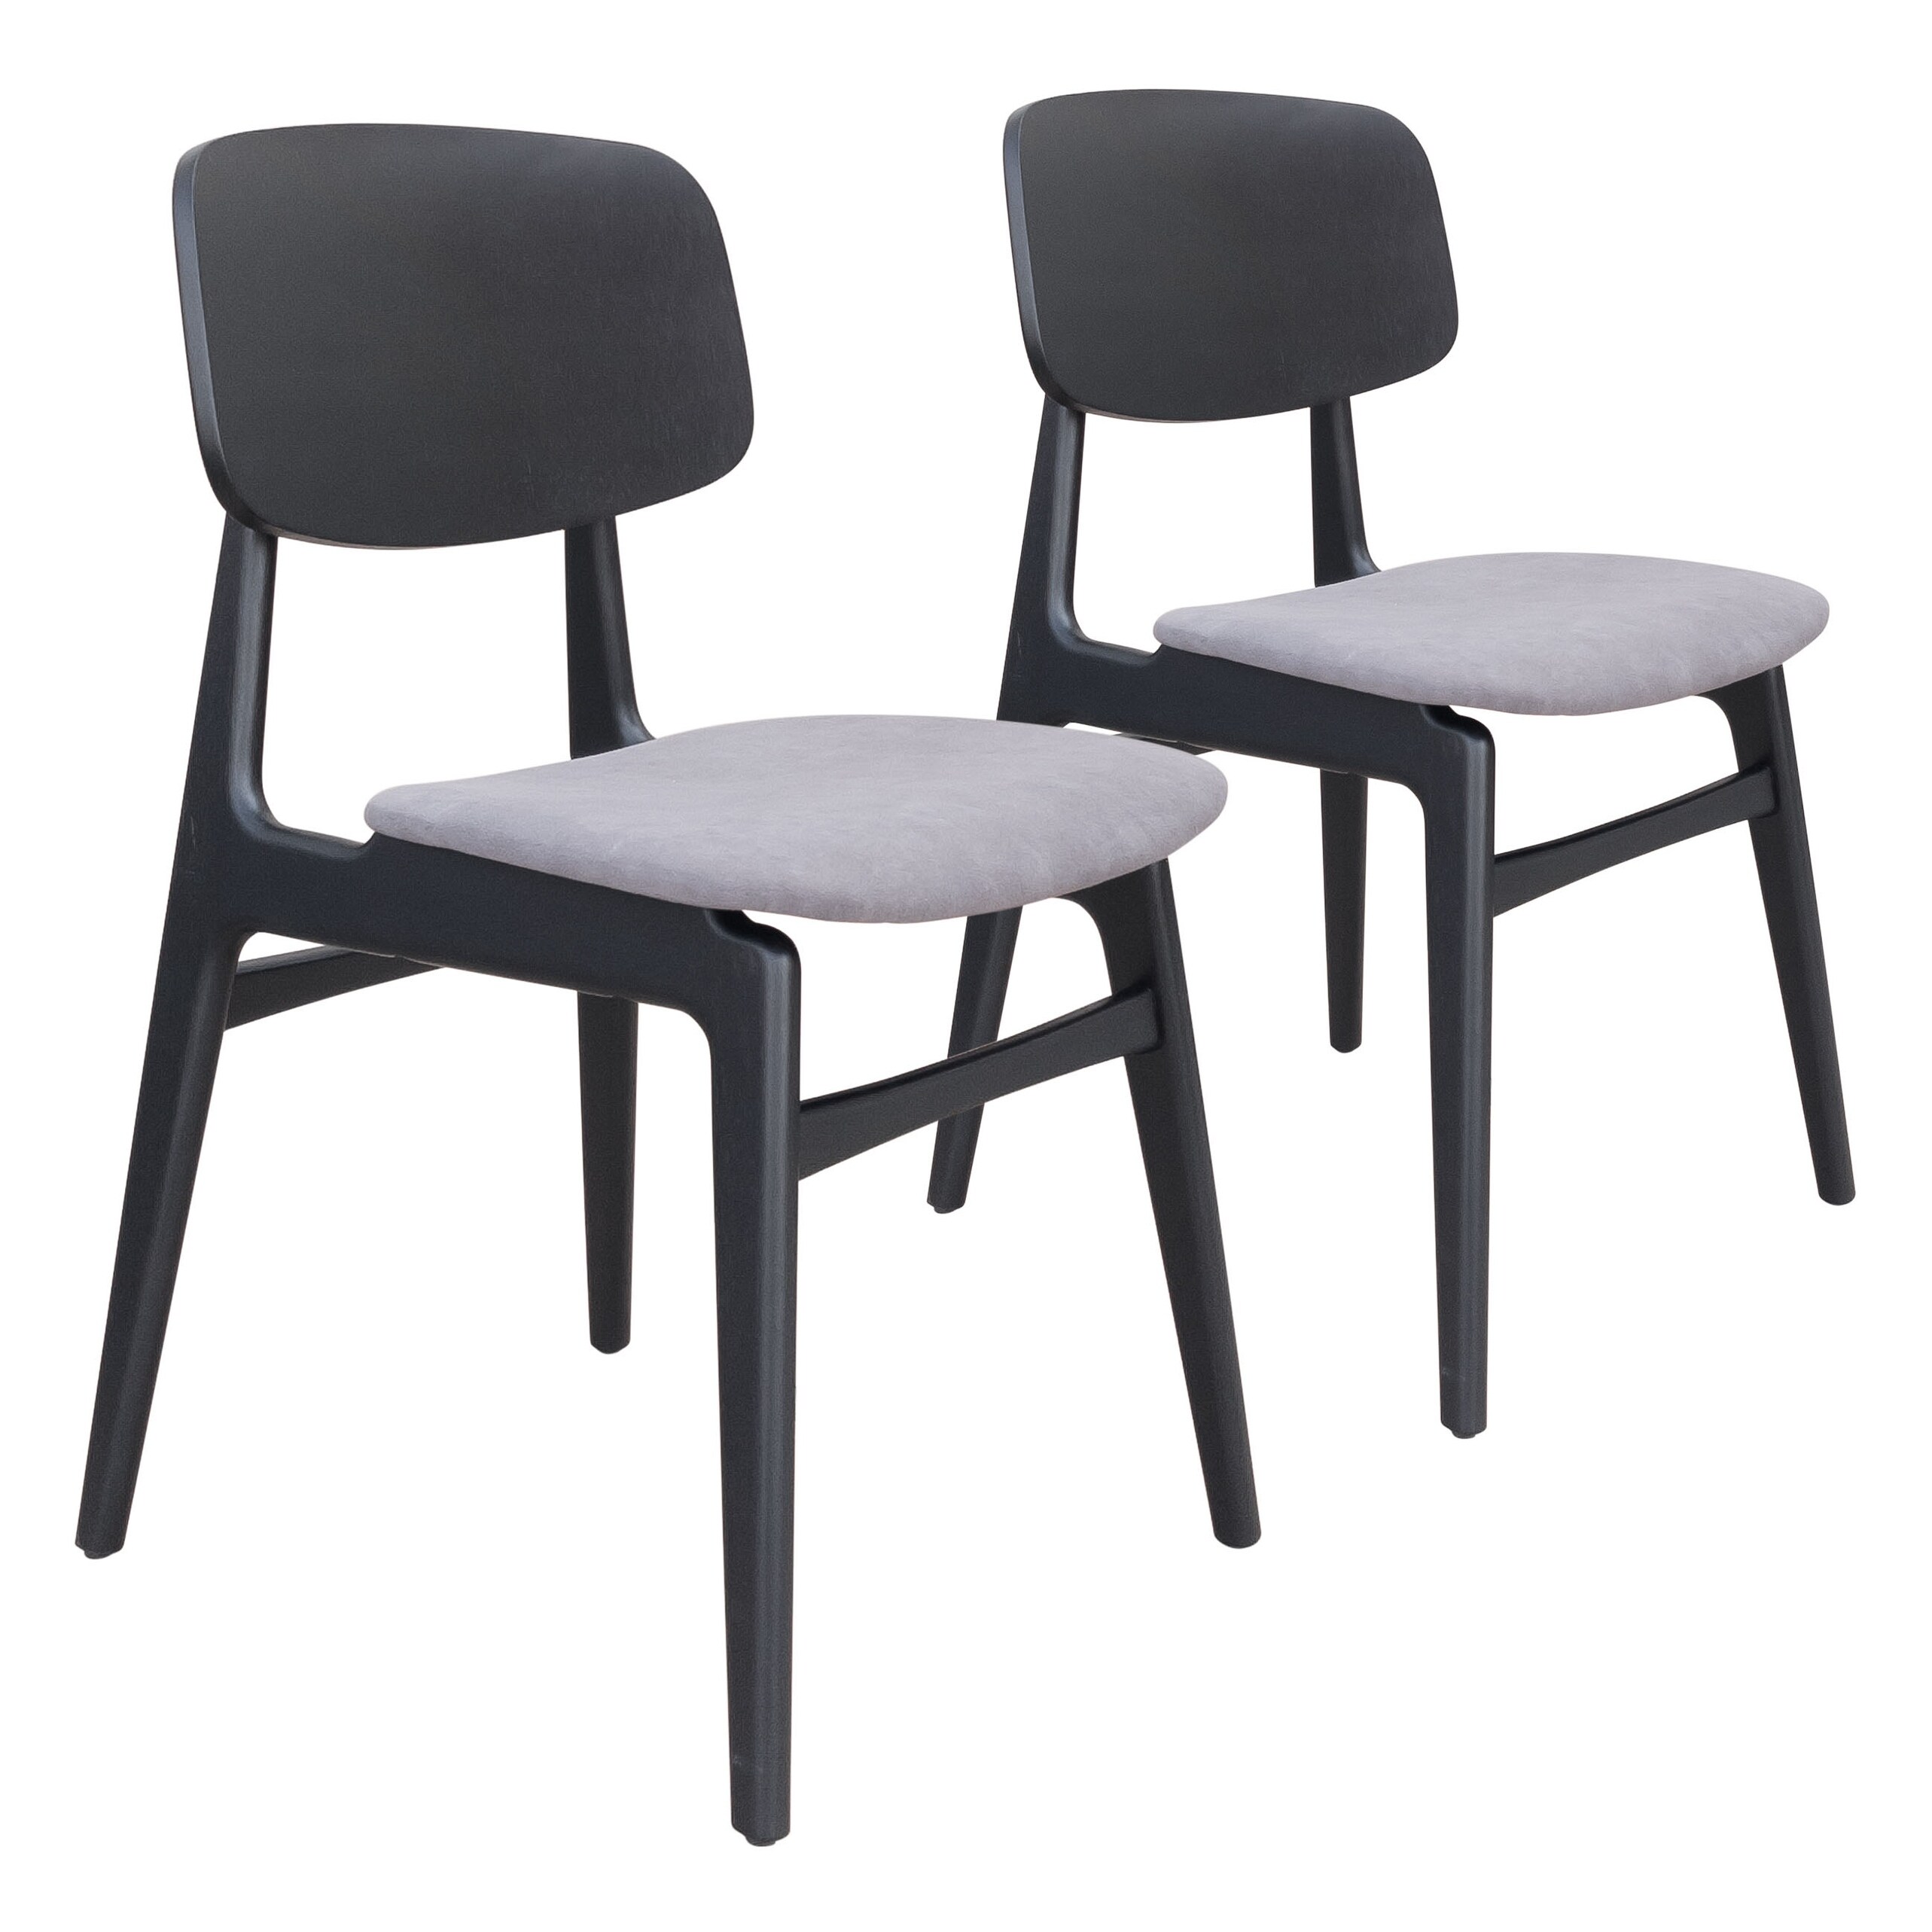 Cold Canyon Dining Chair (Set of 2) Gray & Black - 54 x 84